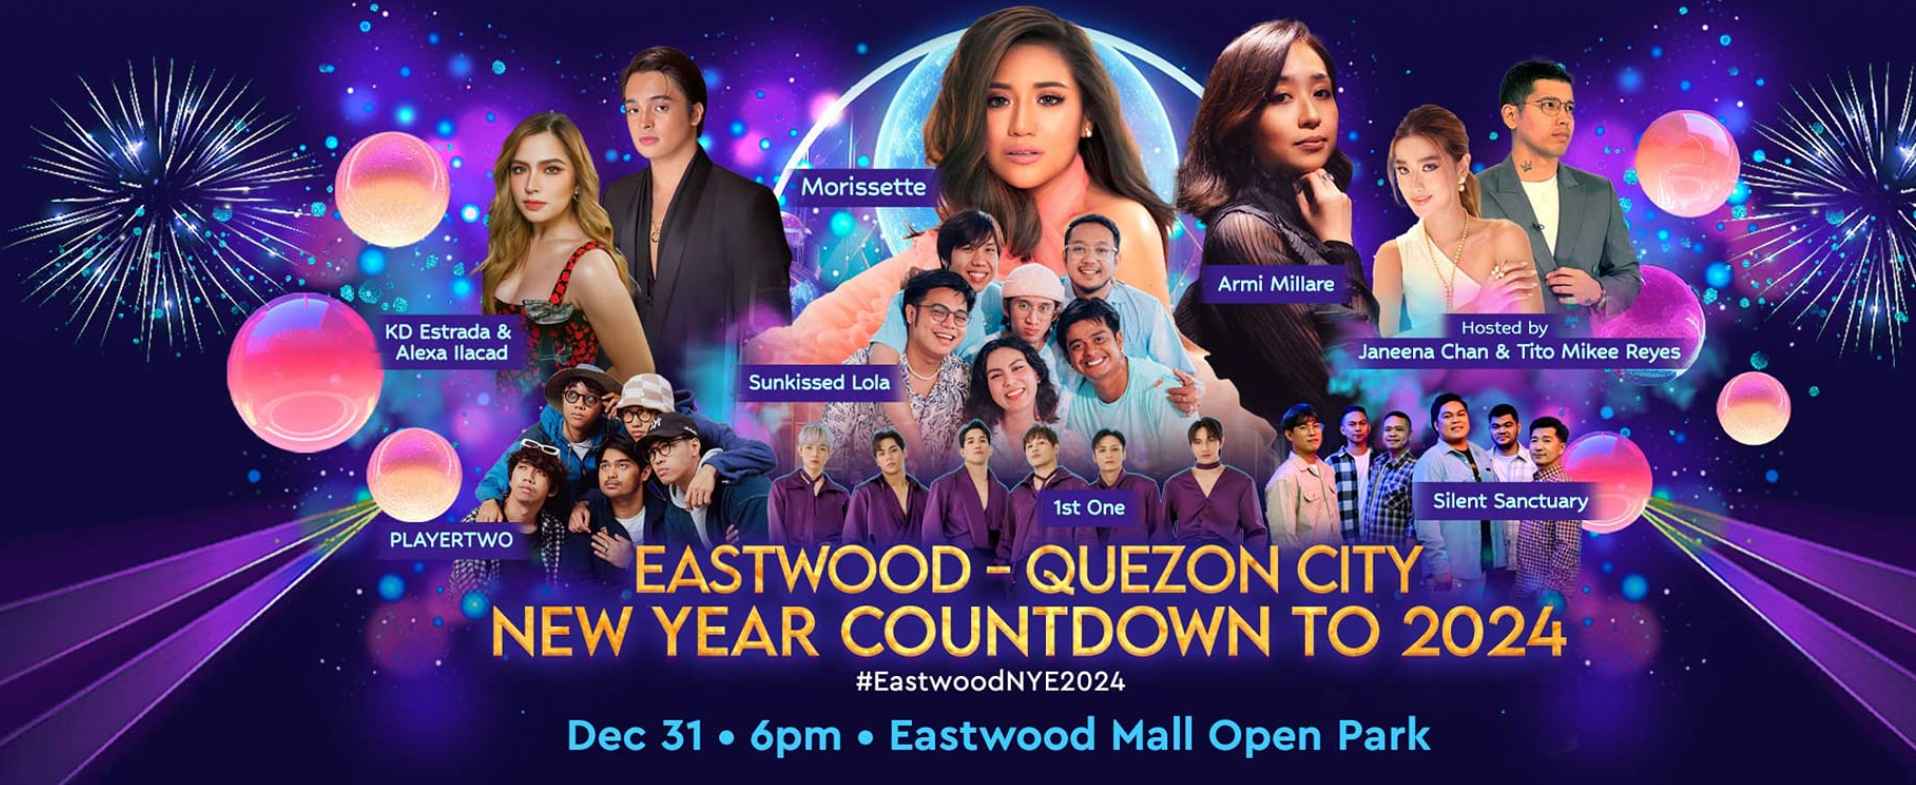 Eastwood - Quezon City New Year Countdown 2024